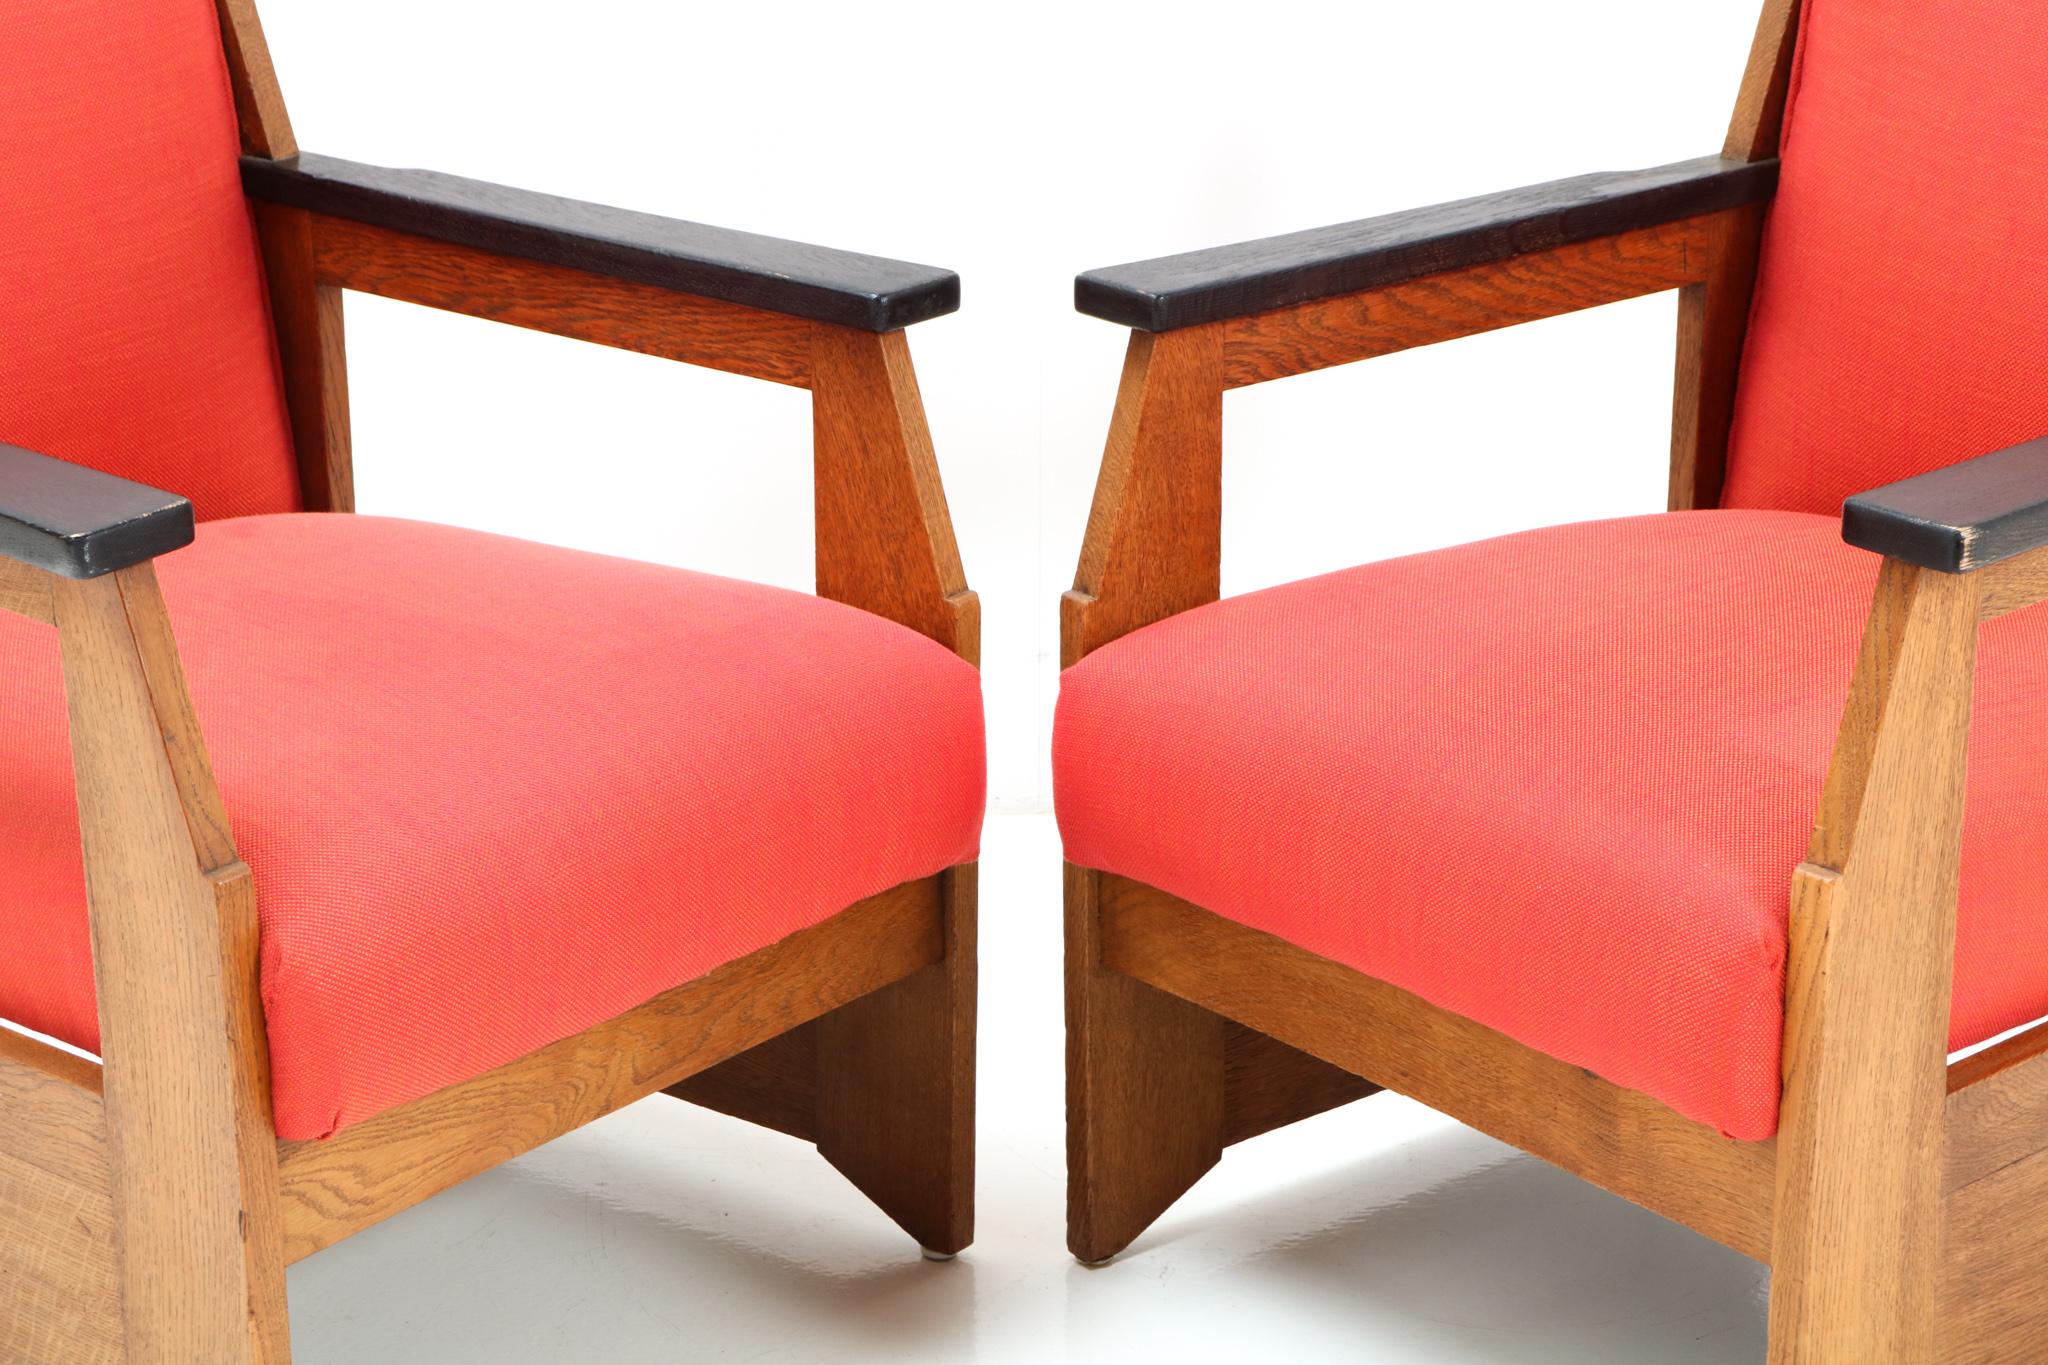 Pair of Oak Art Deco Modernist Easy Chairs by Hendrik Wouda for Pander, 1924 For Sale 6